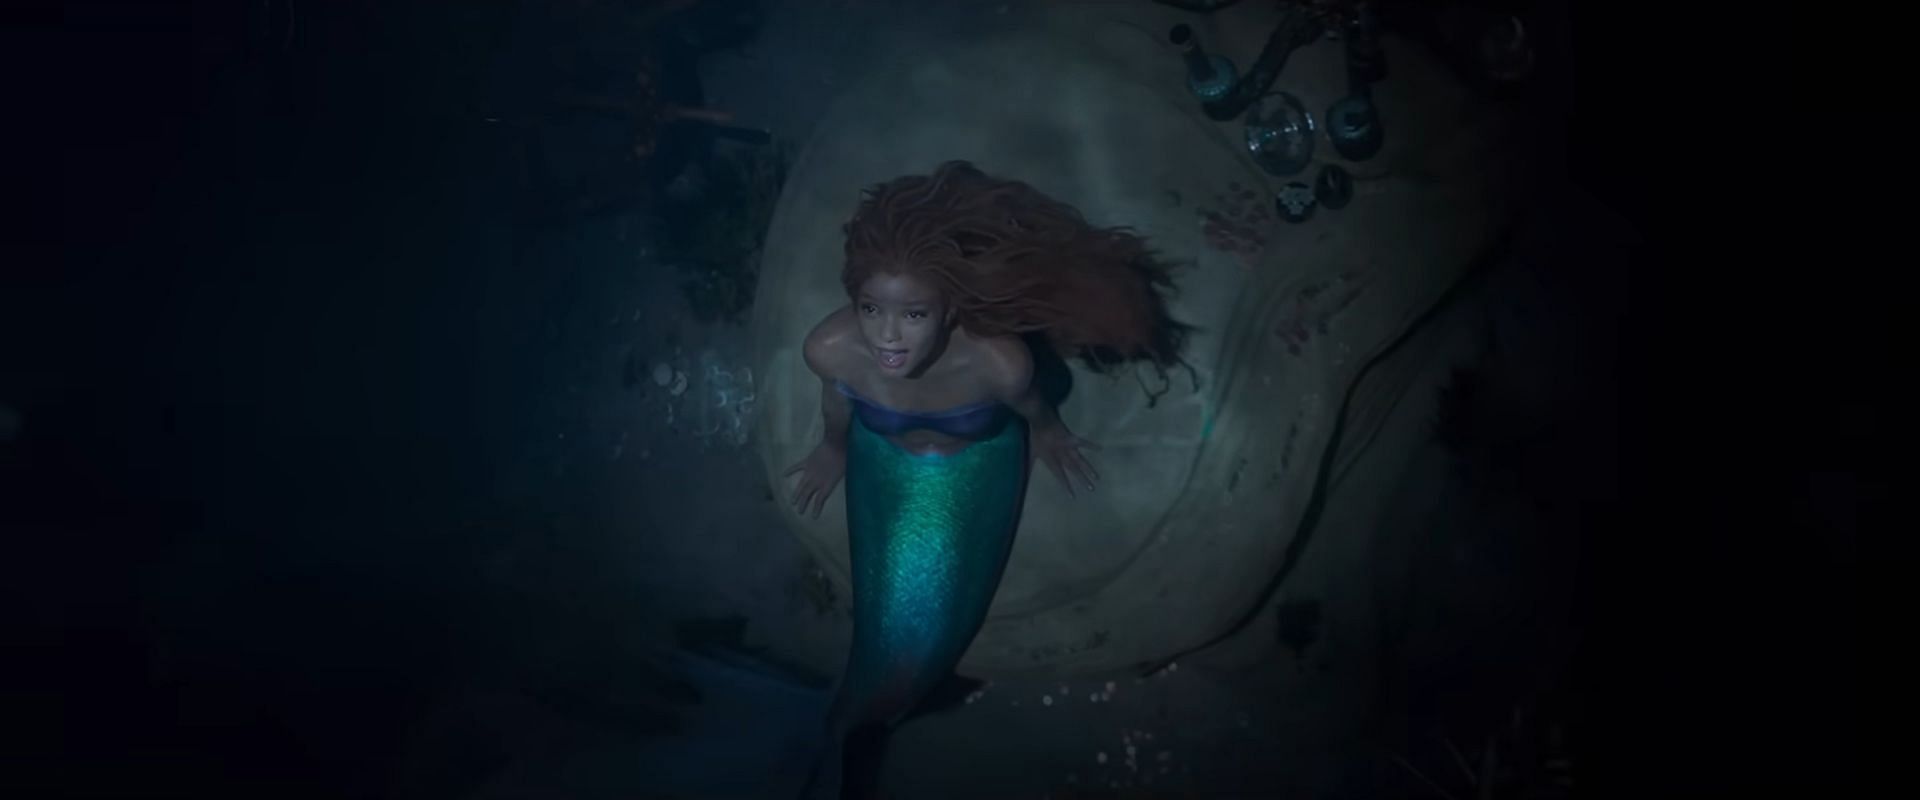 The Little Mermaid 2: Remake Stars Reveal Their Sequel Hopes